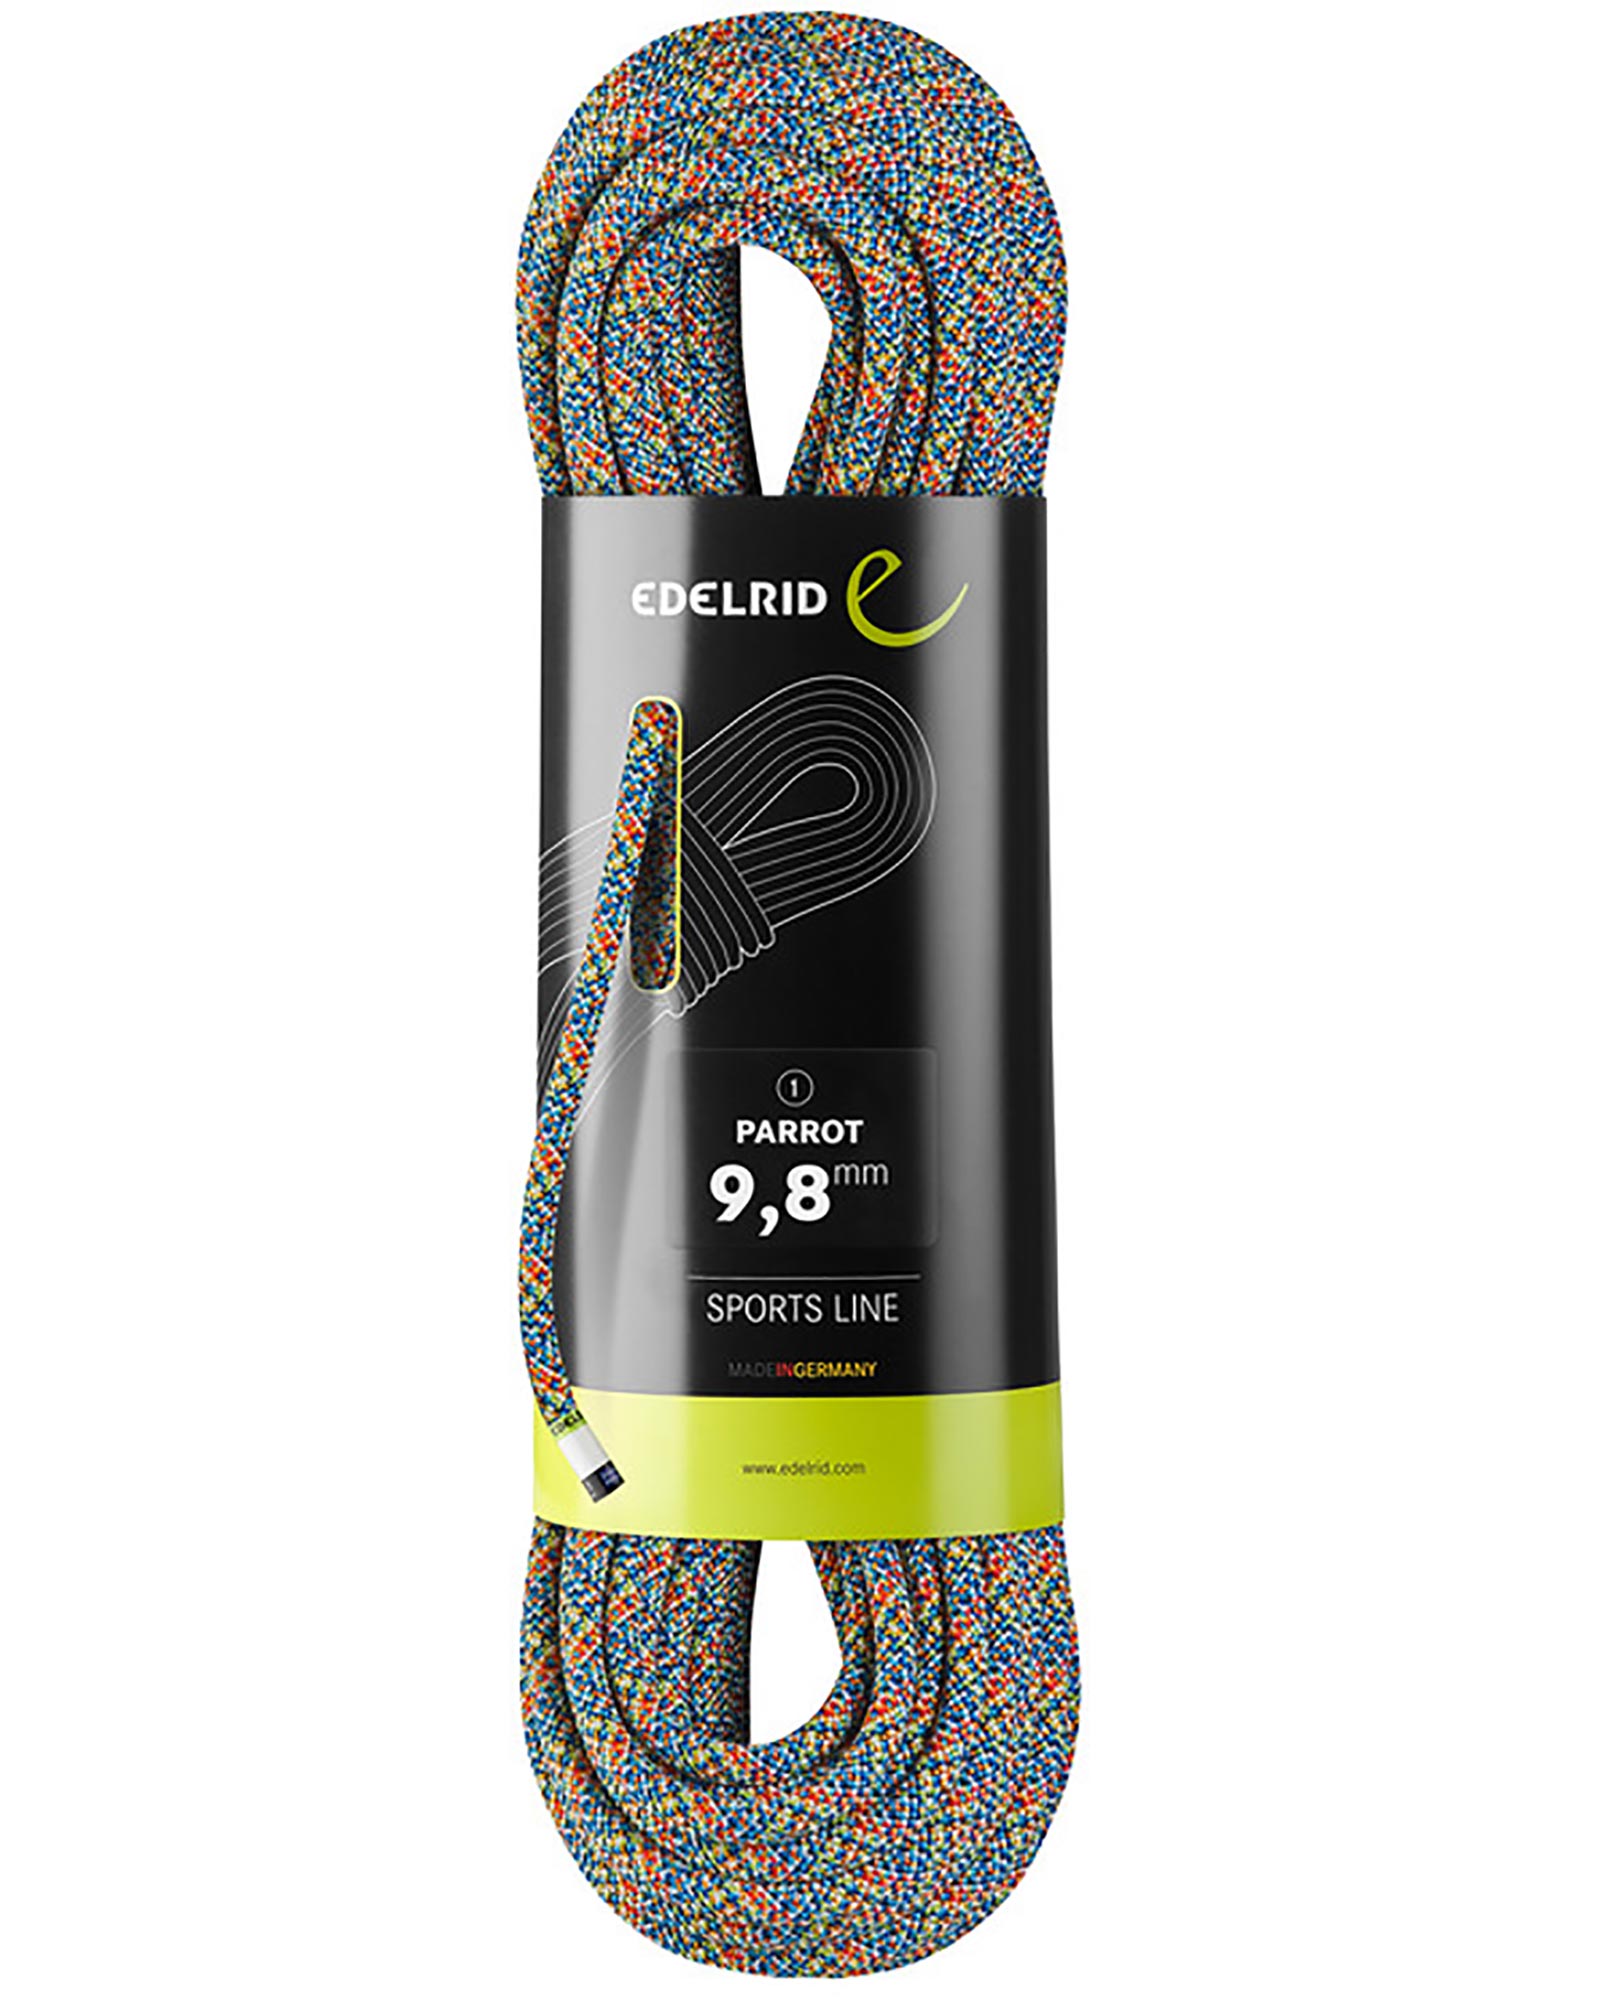 Edelrid Parrot 9.8mm X 60m Rope